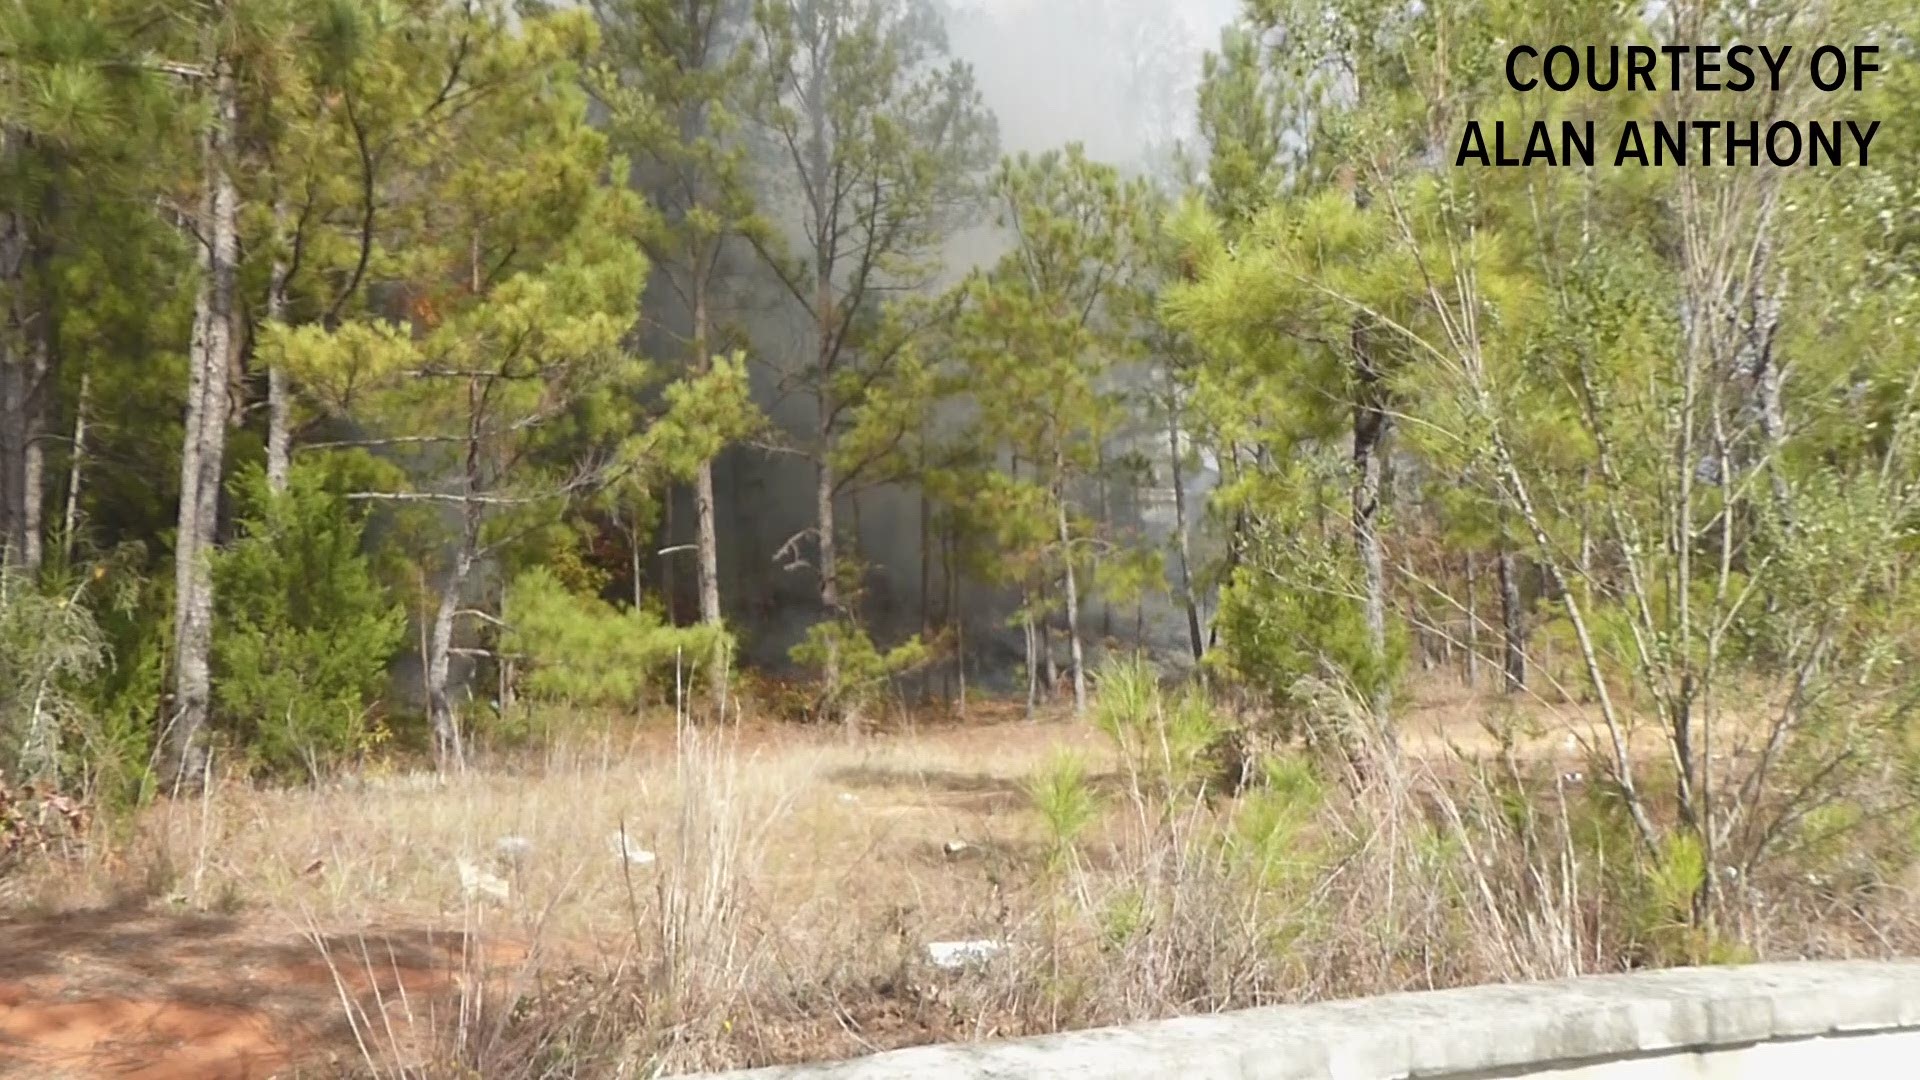 The fire happened Sunday afternoon. The Warner Robins Fire Department said no one was hurt.